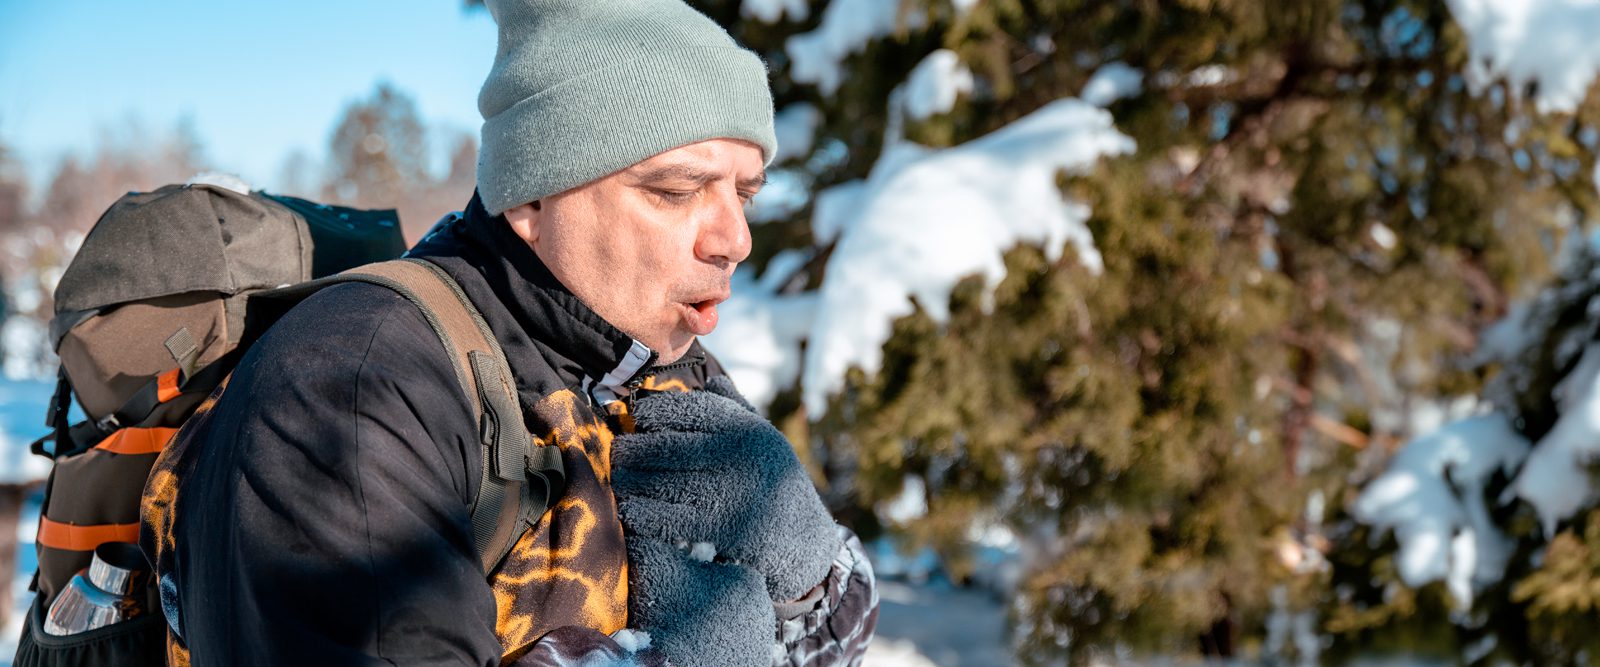 Image of a person experiencing a cardiovascular event in cold weather.